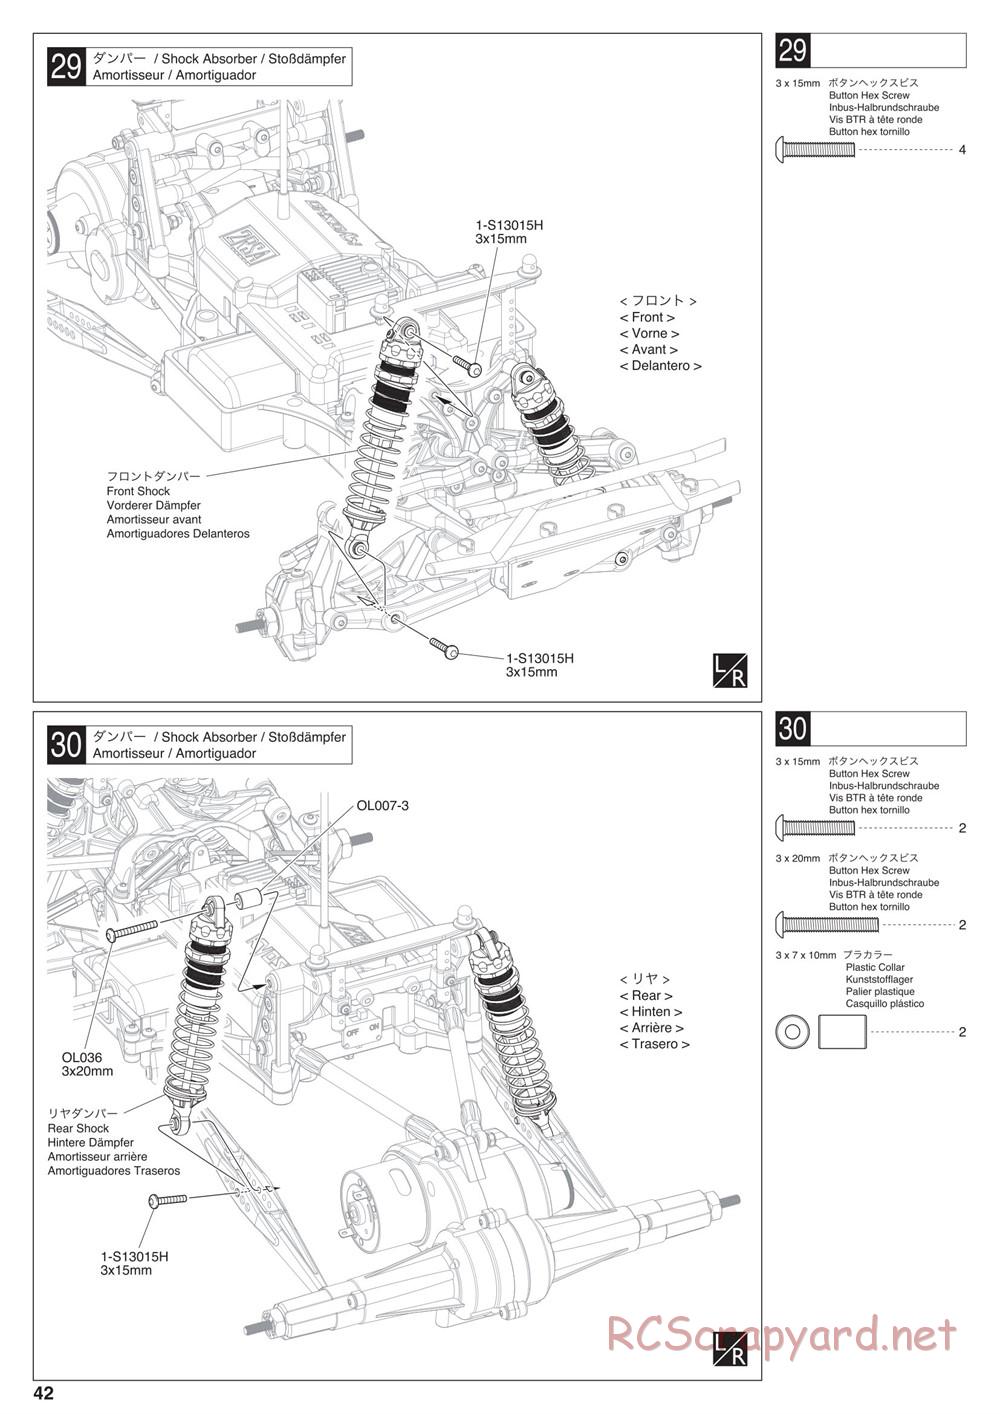 Kyosho - Outlaw Rampage - Manual - Page 42